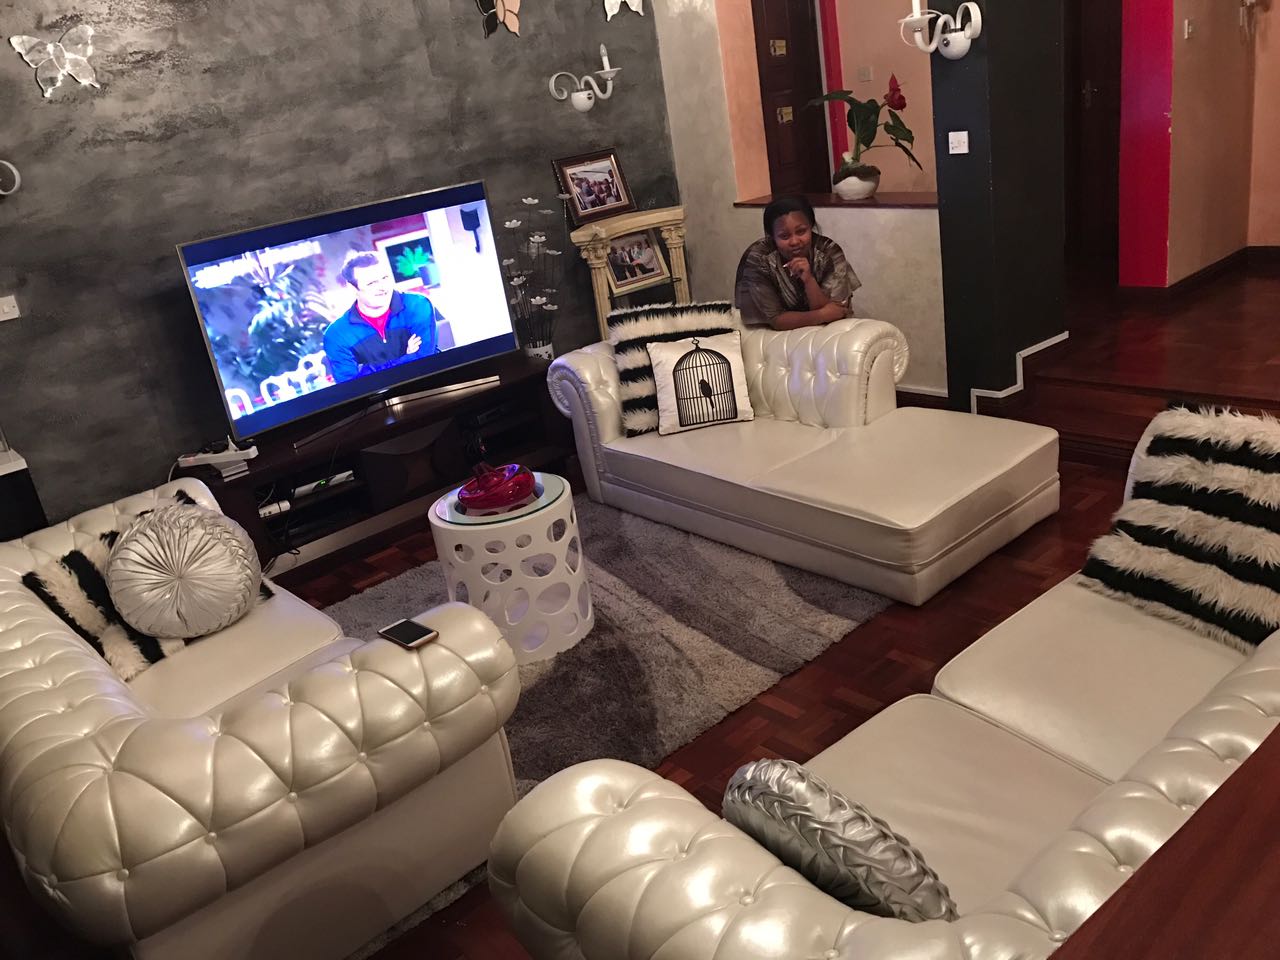 A photo showing the living room of Omanga's house.